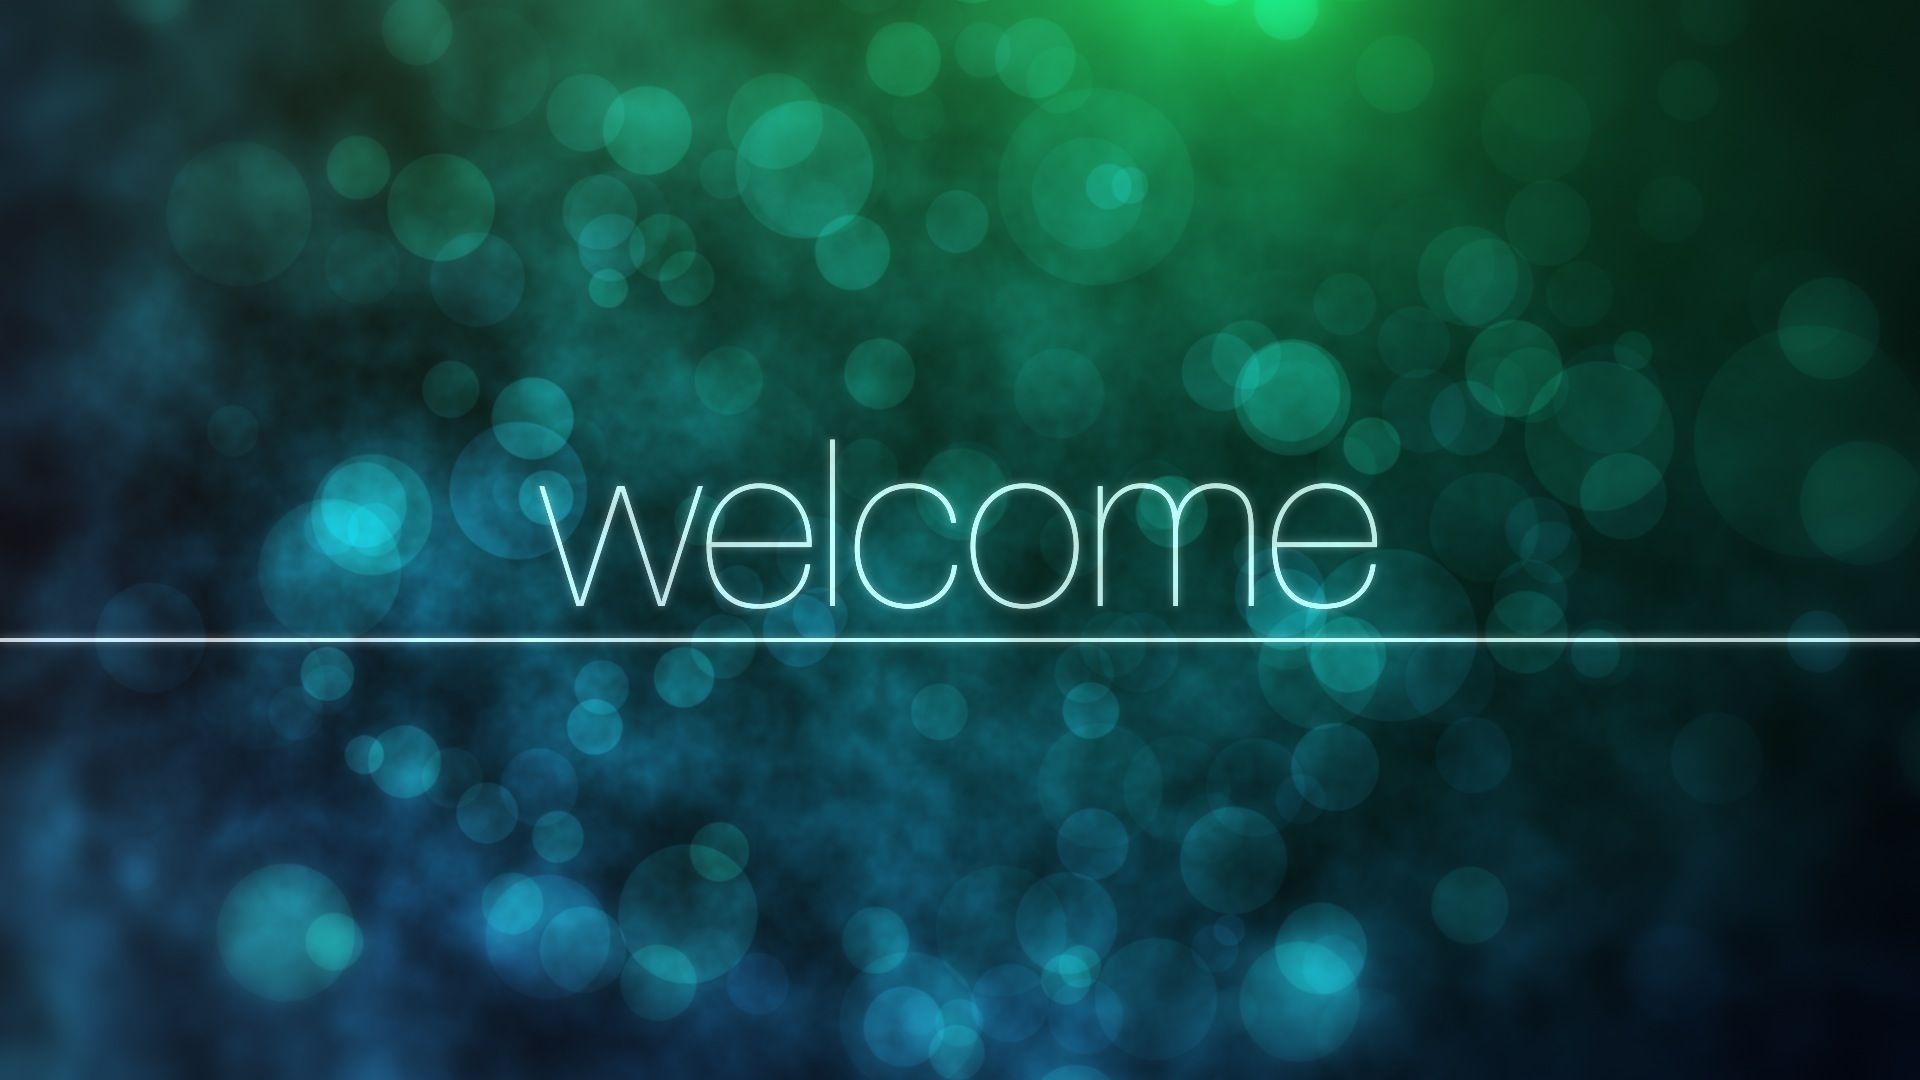 Welcome wallpaper for computer